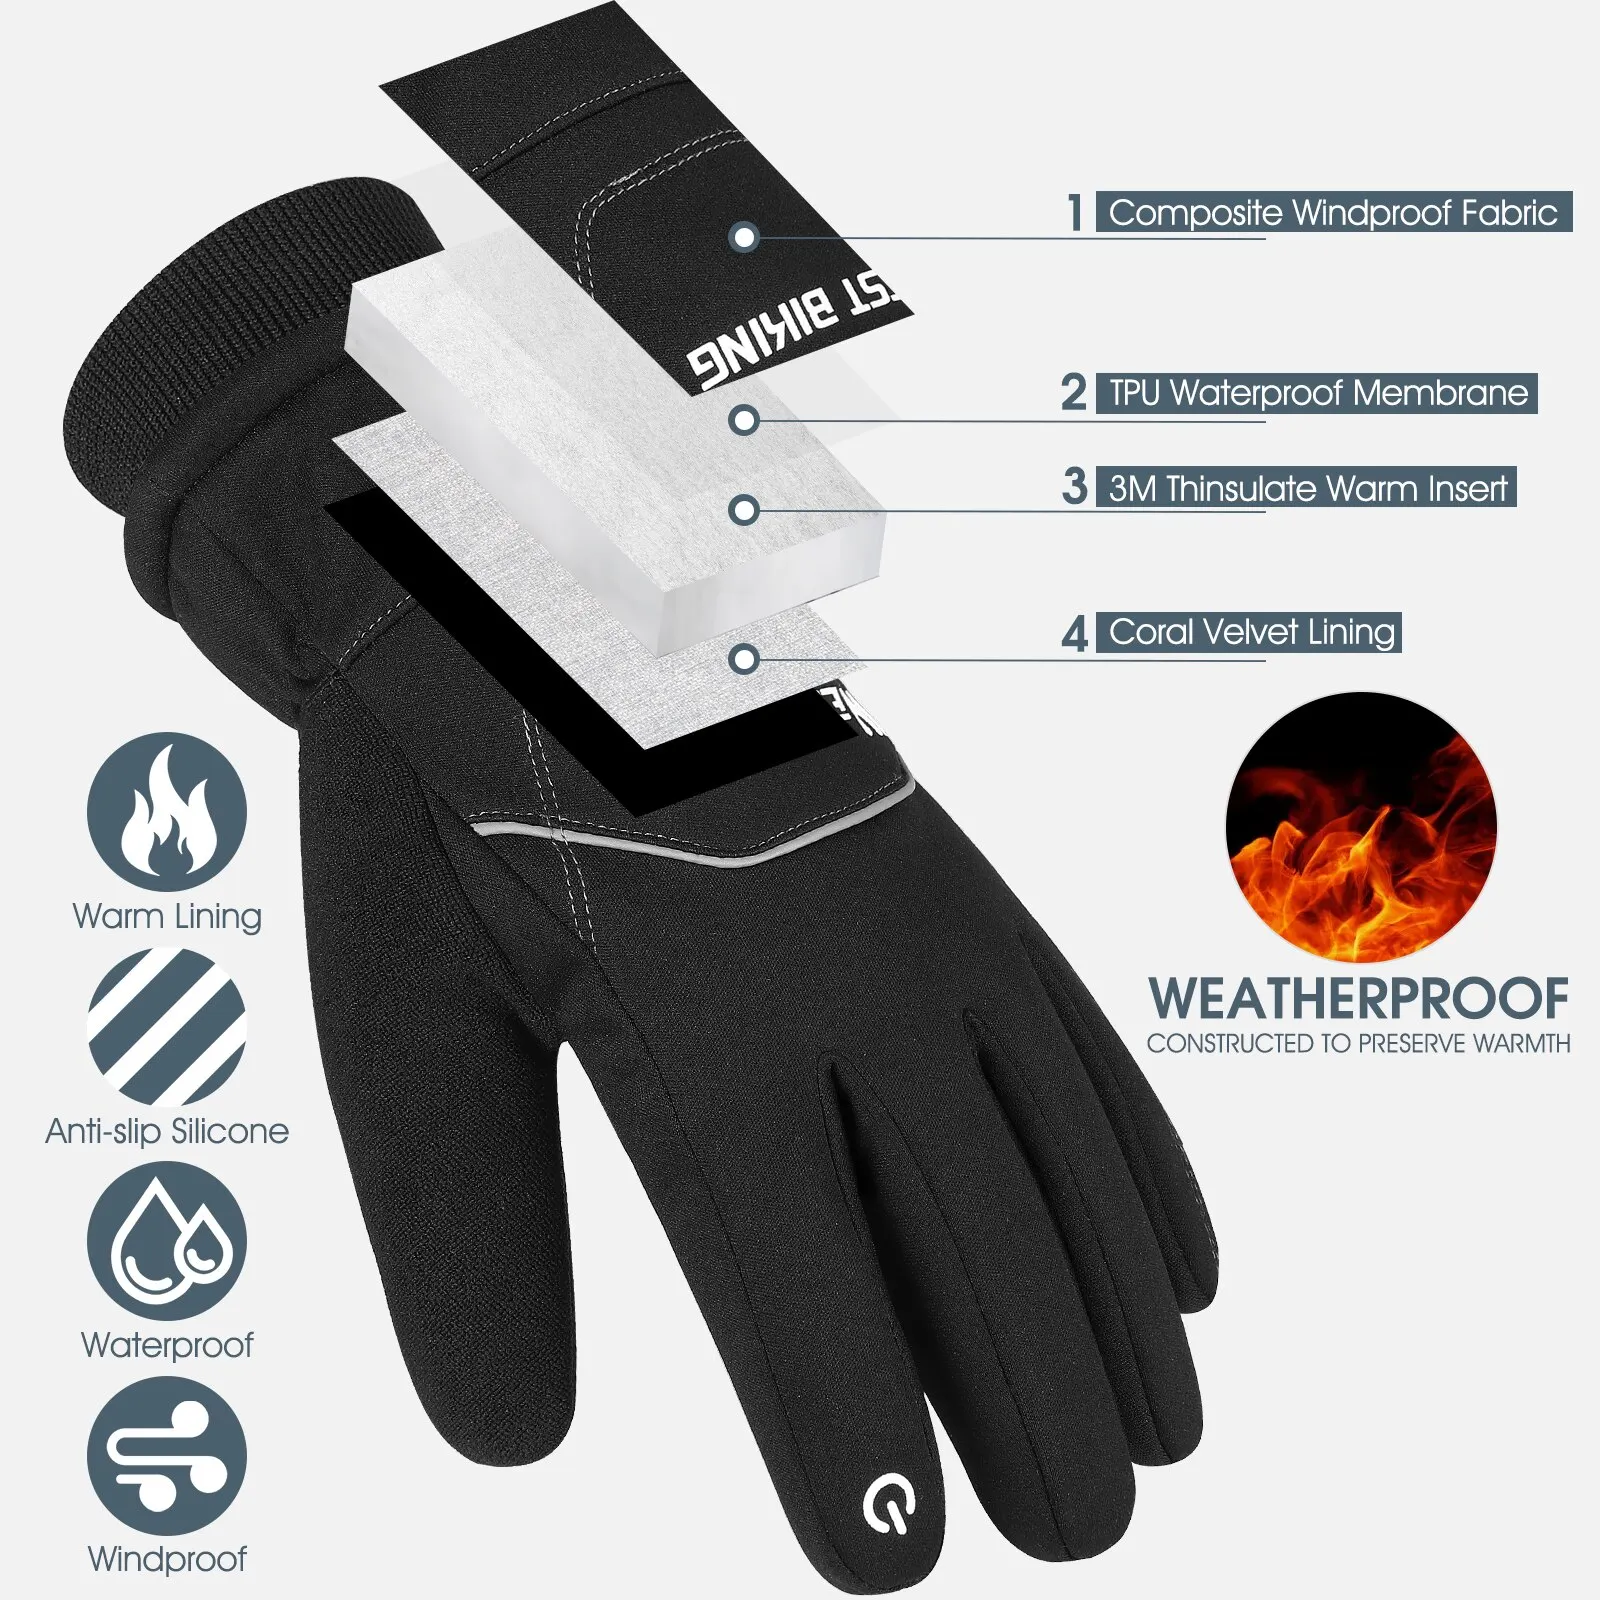 Extremus Outlook Peak Ski Gloves for Man and Women, Warm 3M Thinsulate Snow  Gloves for Cold Weather, Waterproof and Windproof Sn - AliExpress